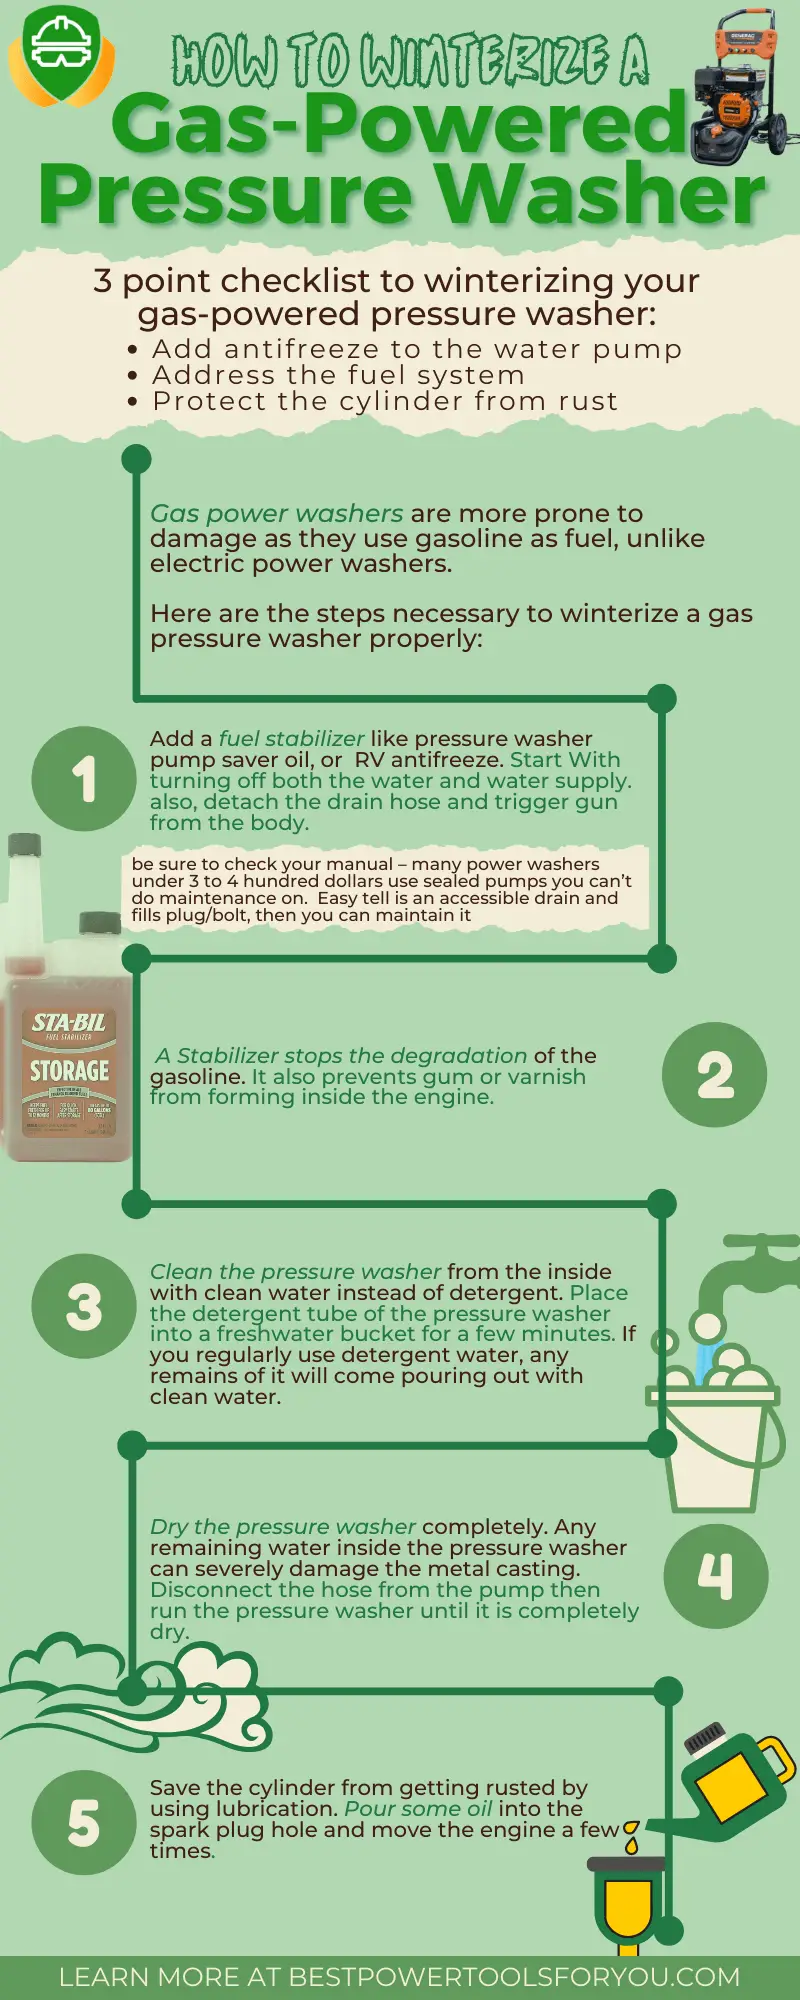 Infographic on how to winterize a gas pressure washer 